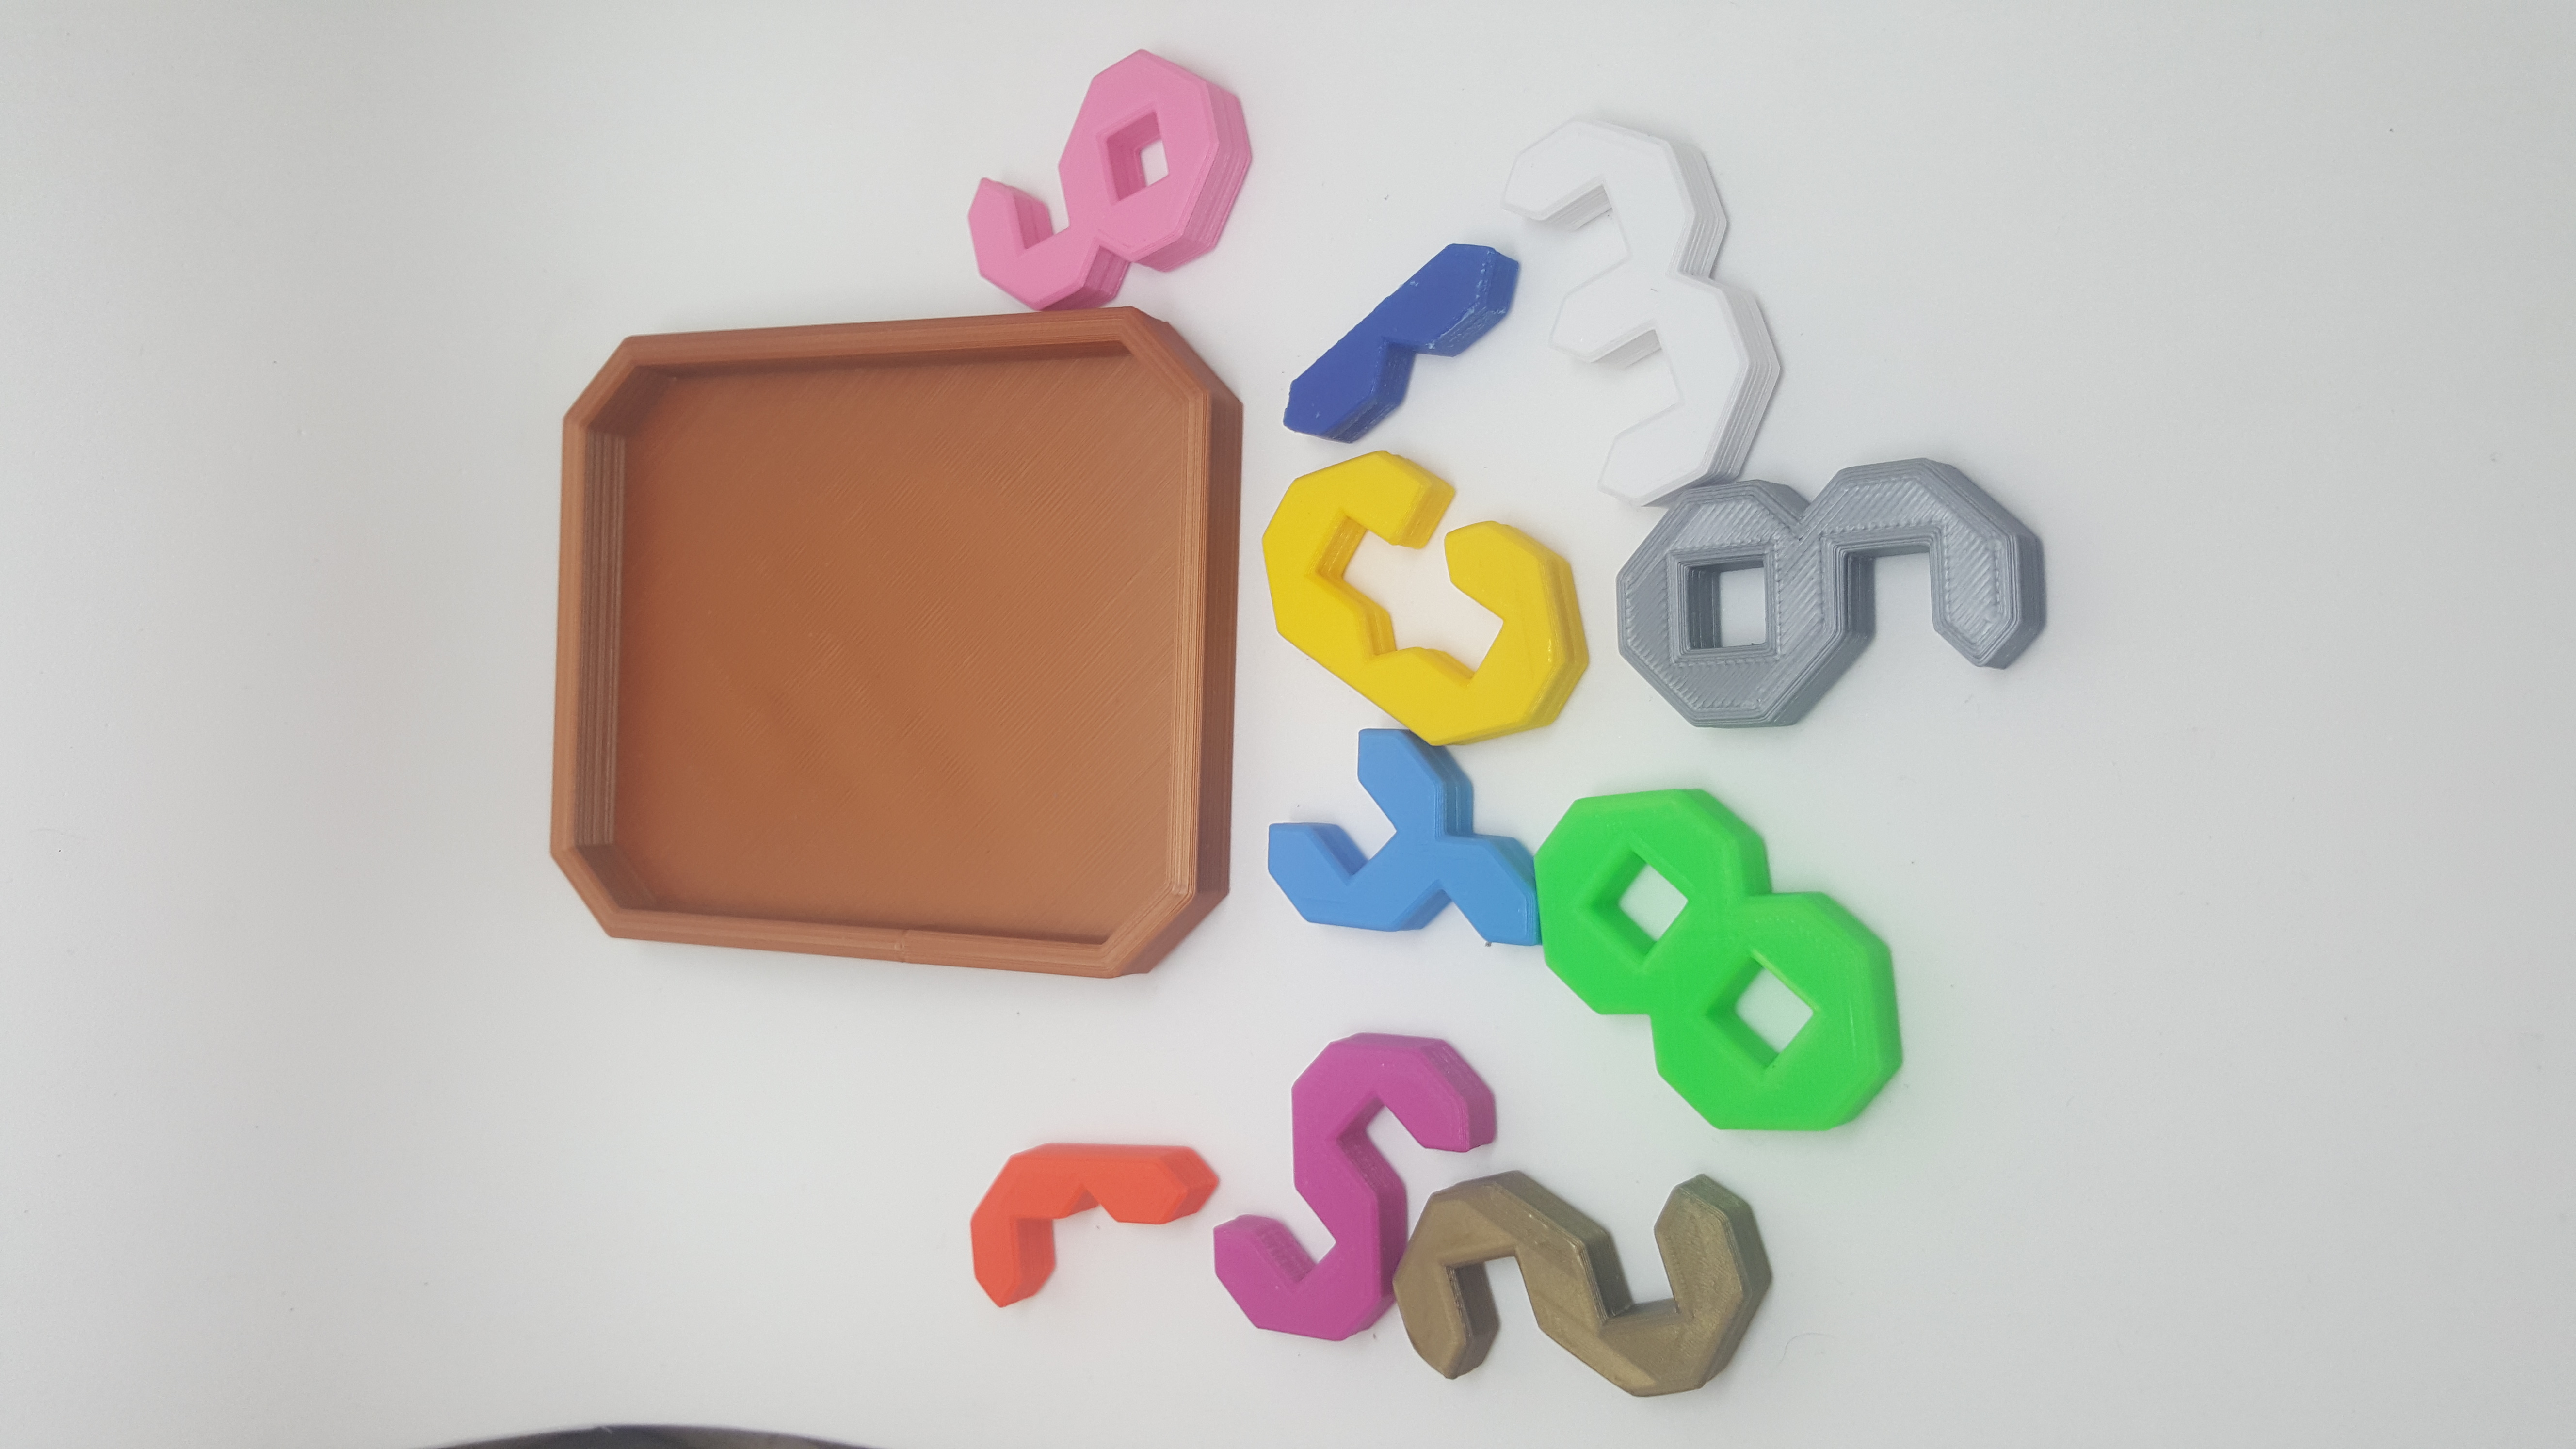 3D Printable 10 Digits Puzzle (Tricky Number Puzzle) by Felix Schuler